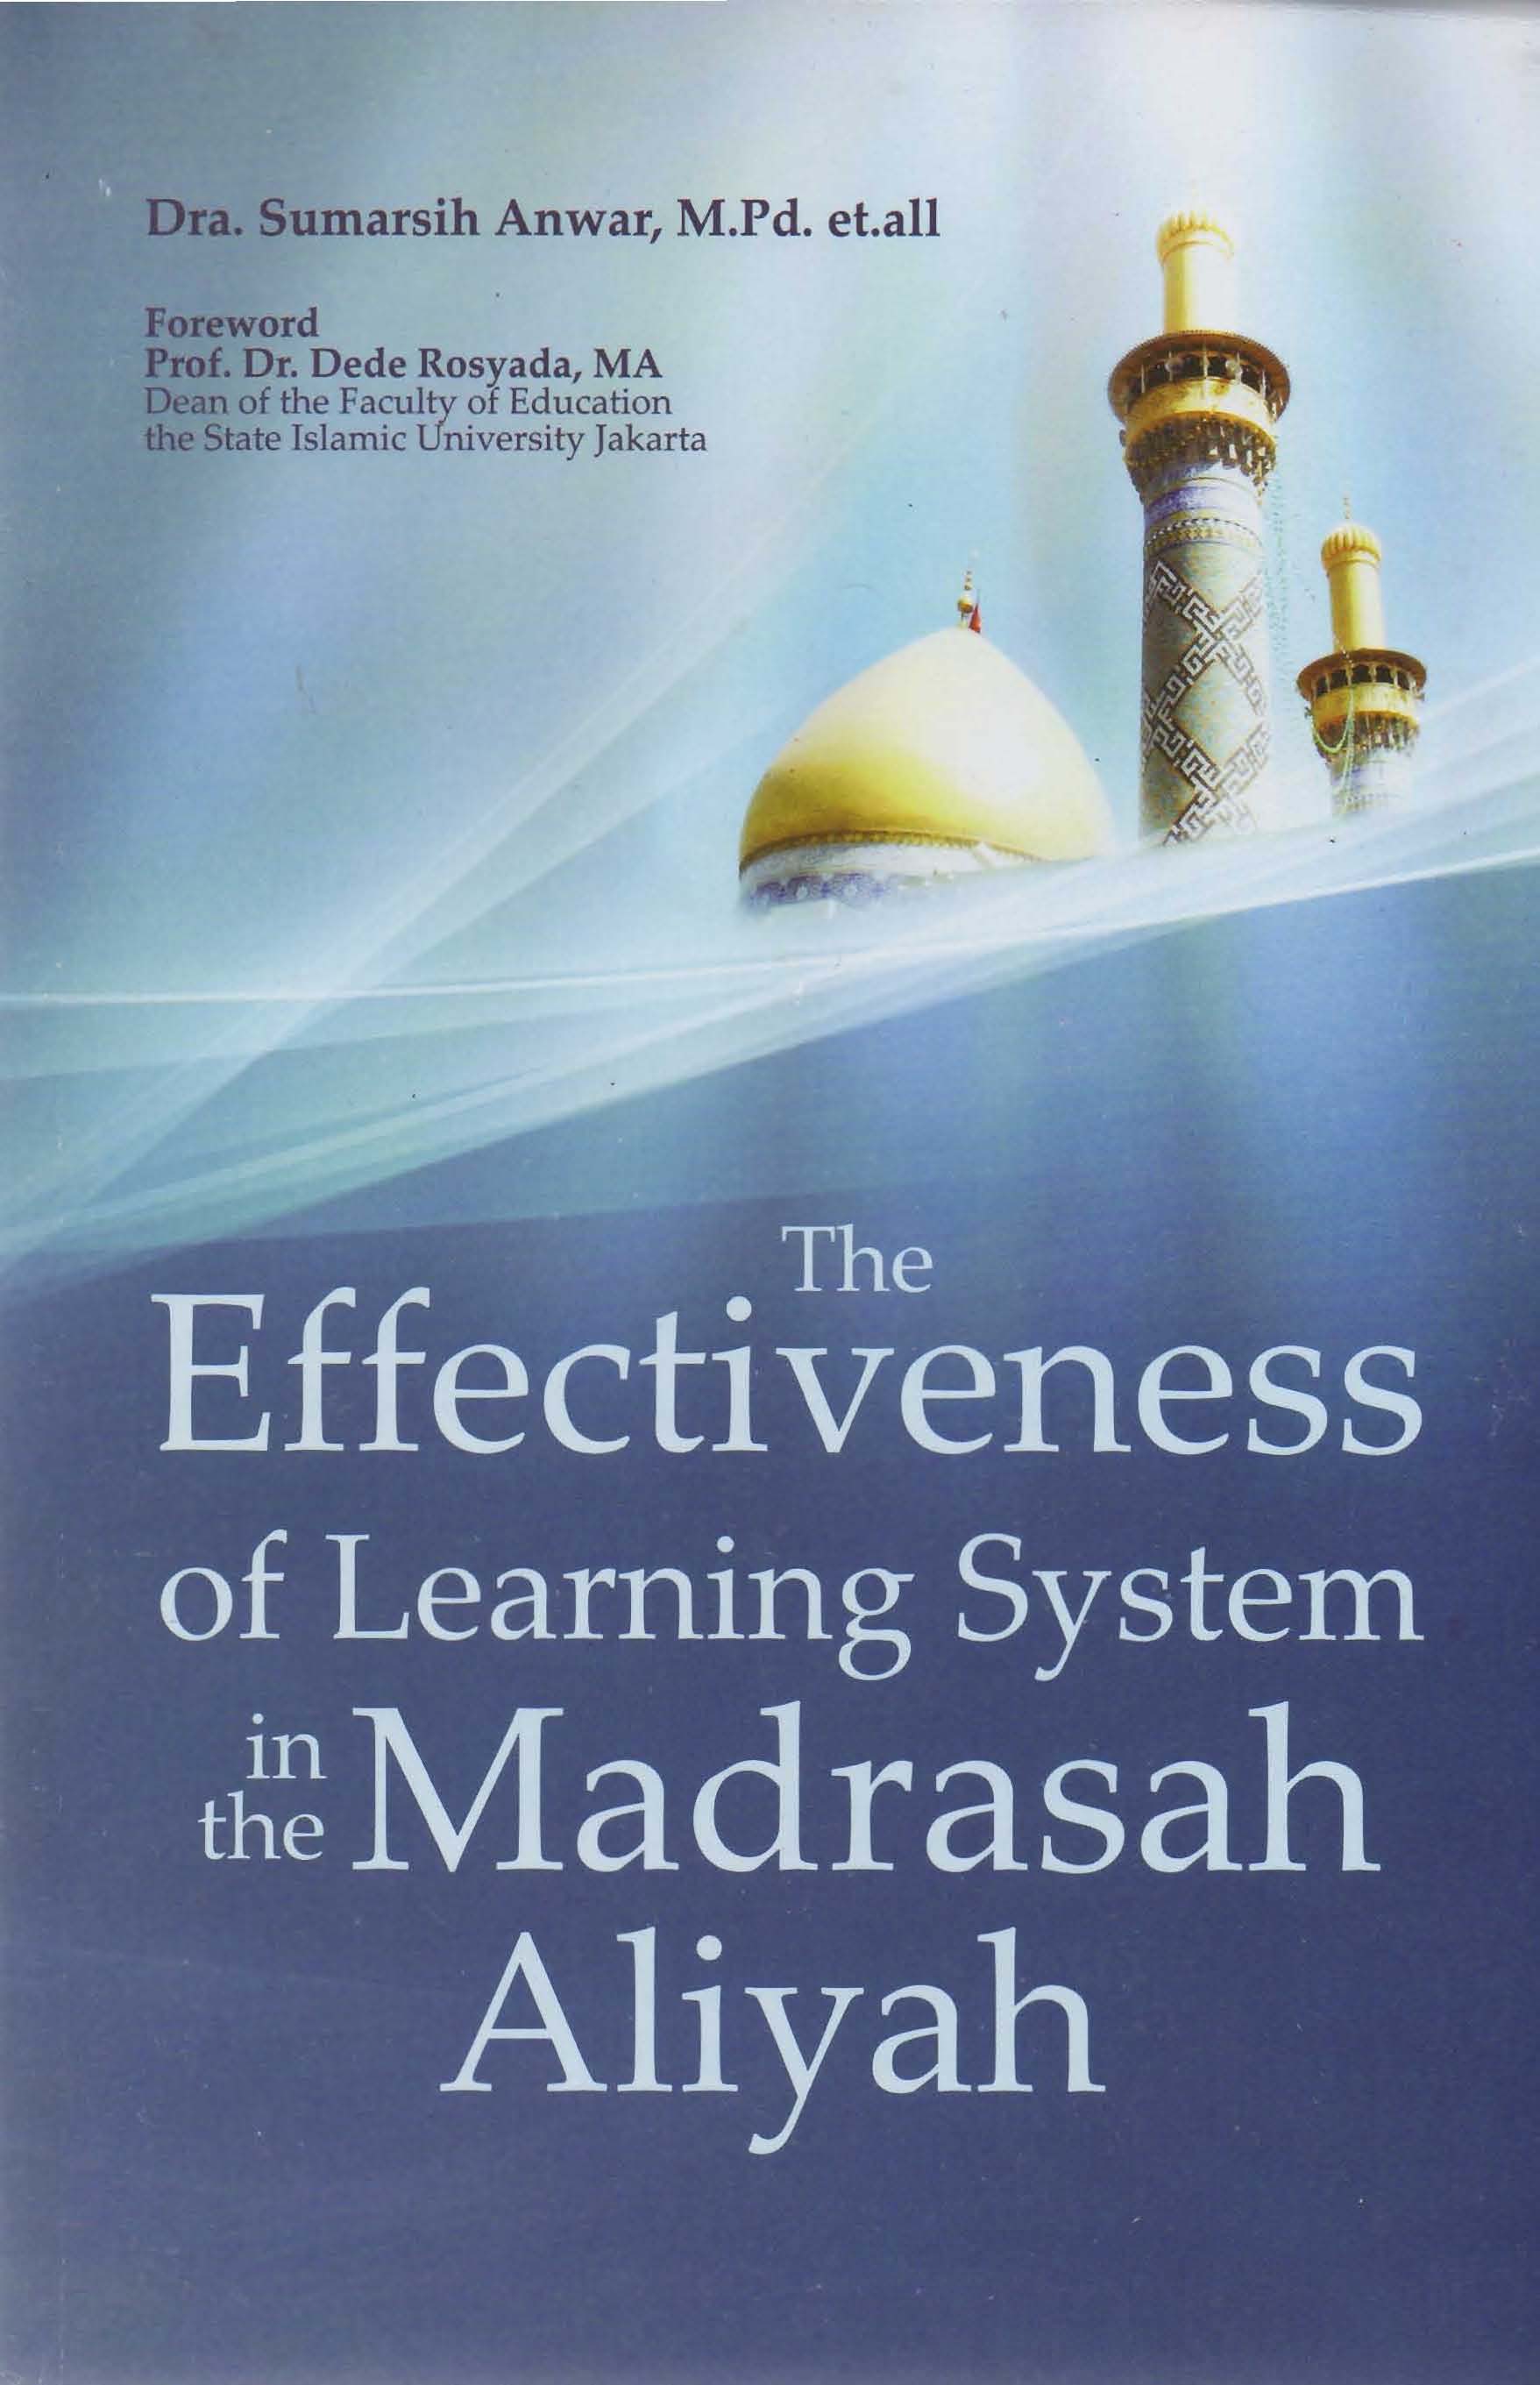 The Effectiveness learning system in the Madrasah Aliyah